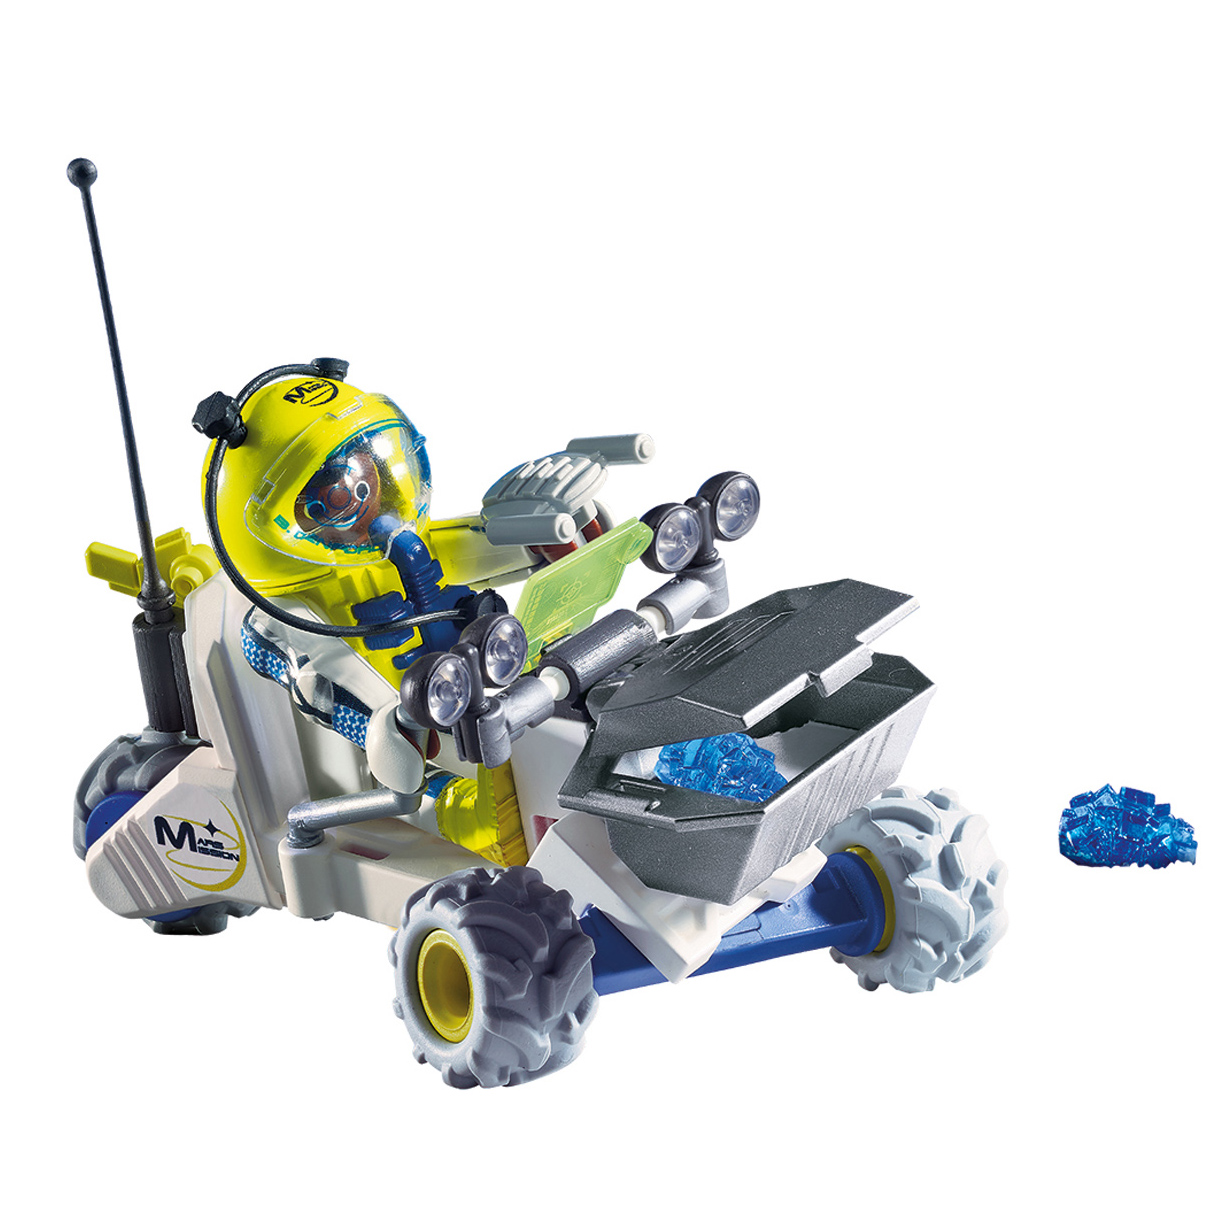 PLAYMOBIL Mars Rover Vehicle - image 1 of 6